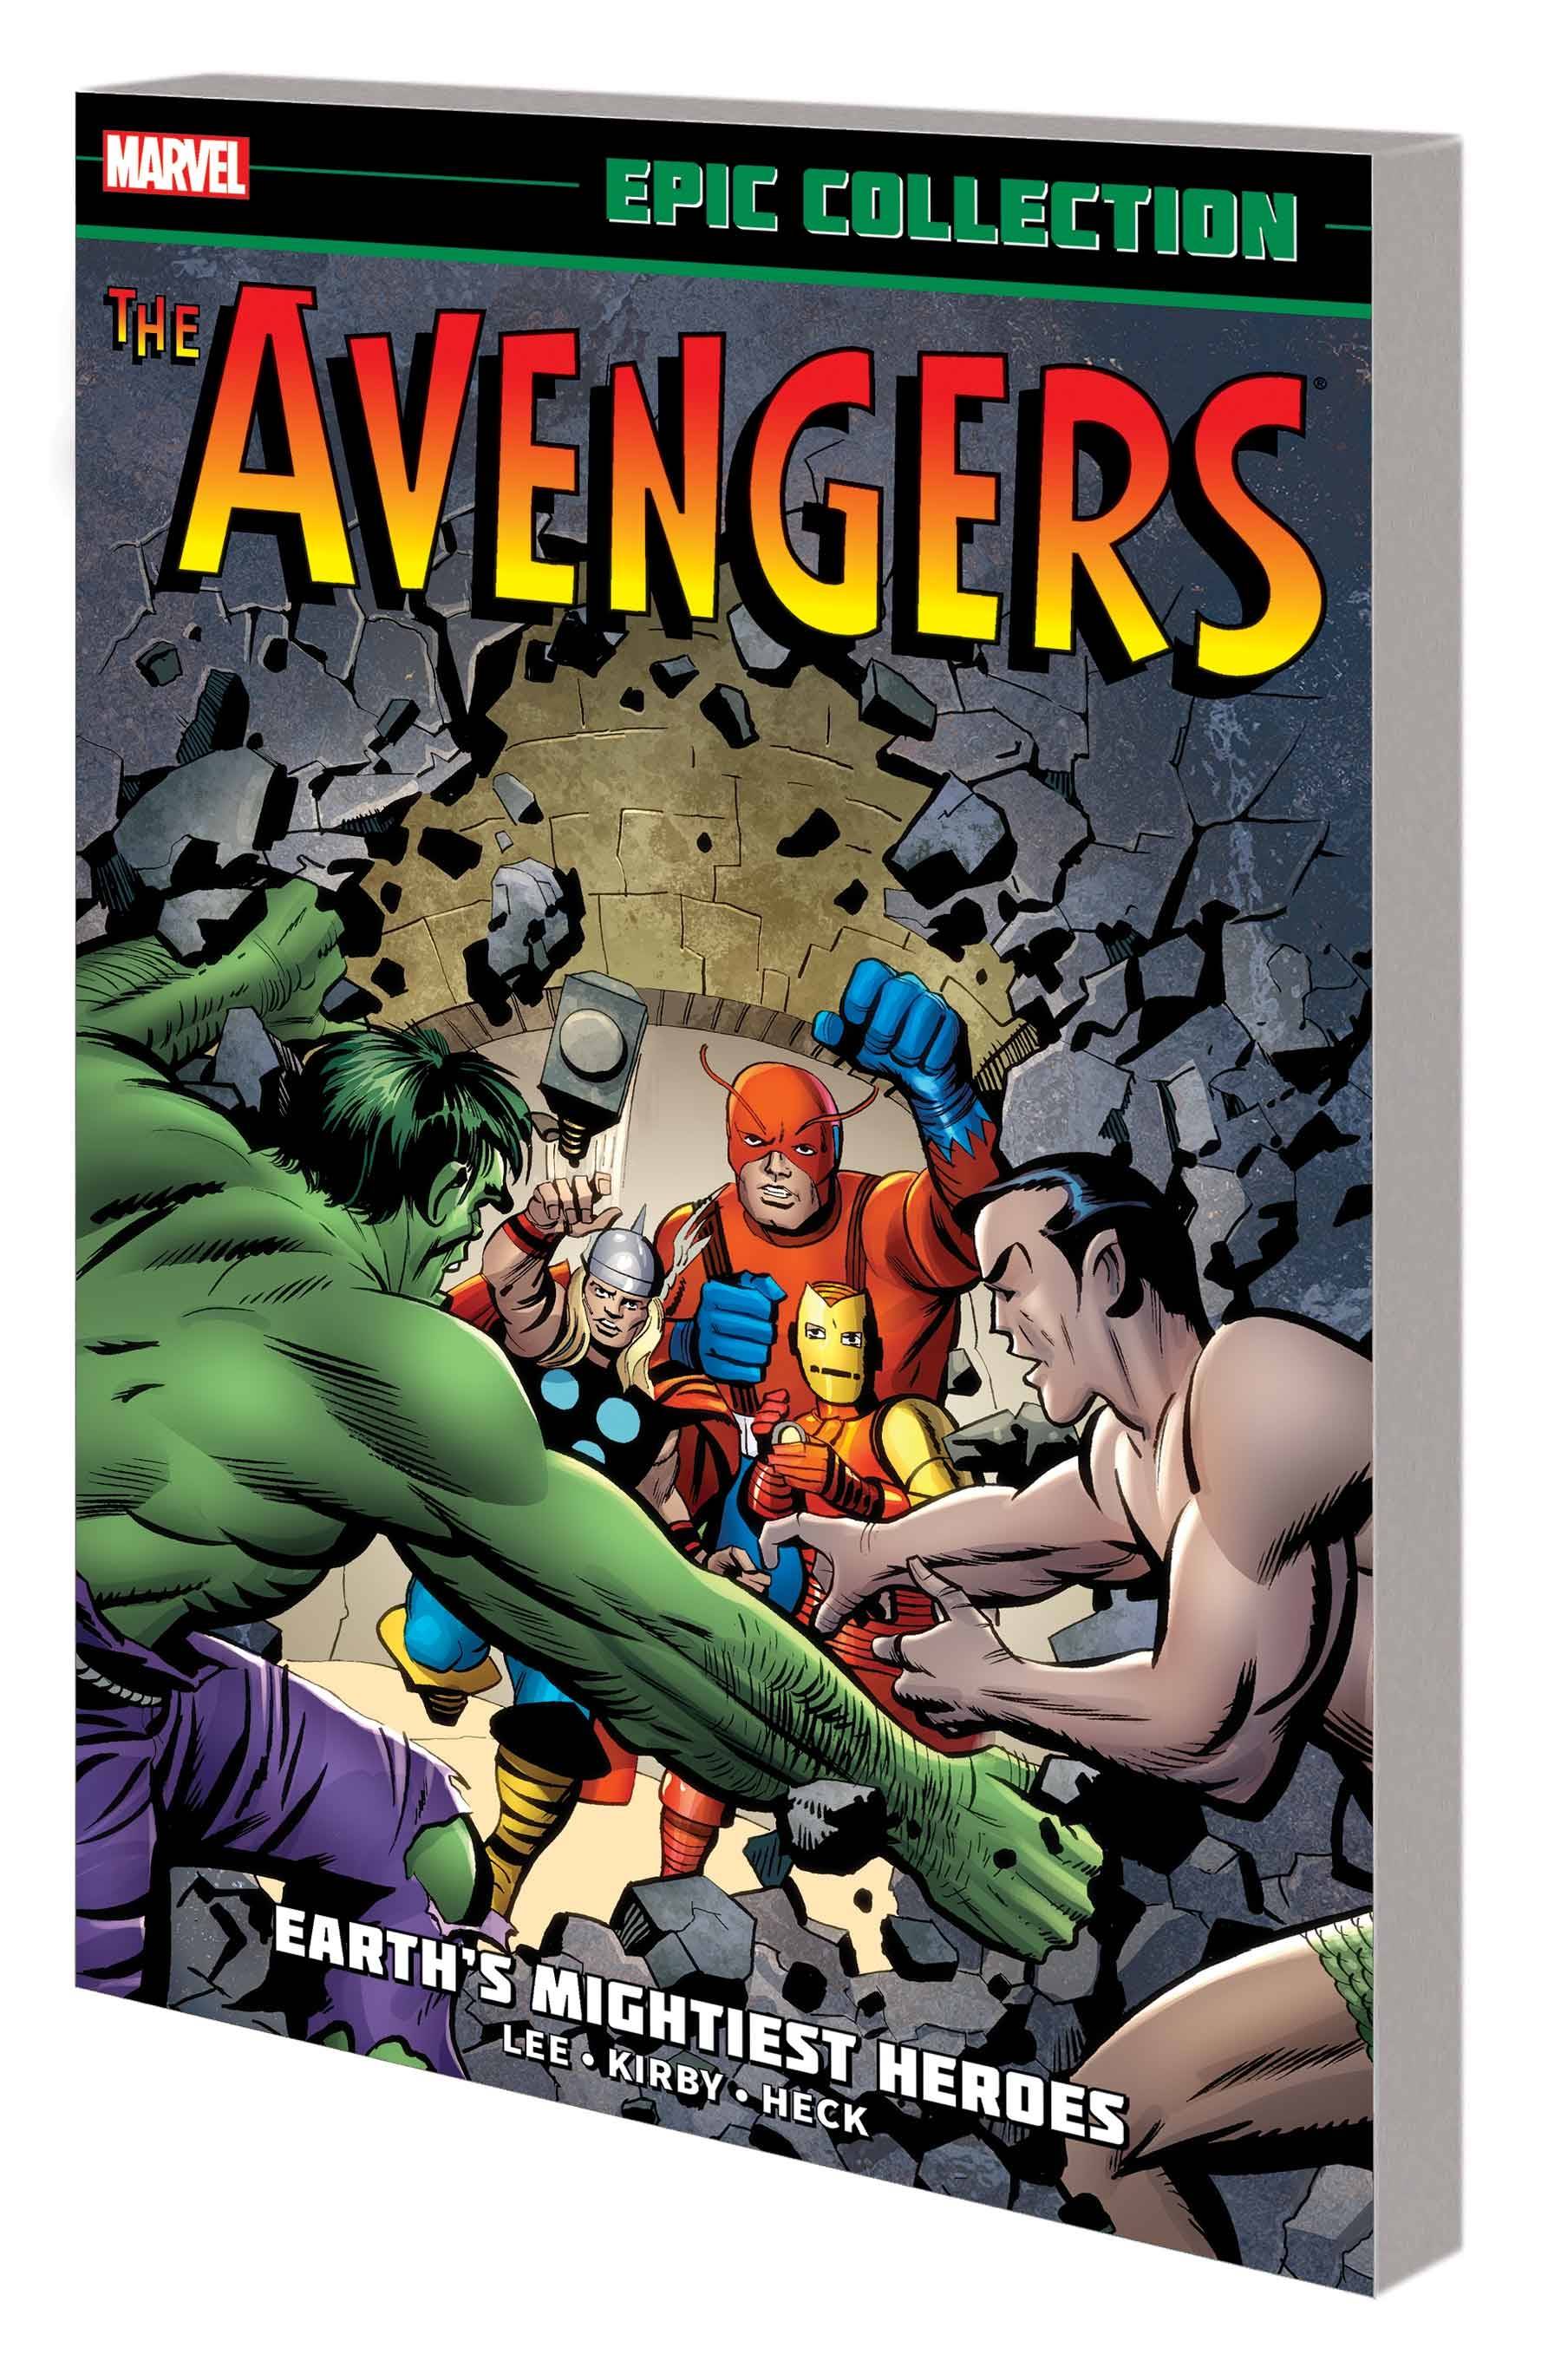 AVENGERS EPIC COLLECTION TP VOL 01 EARTHS MIGHTIEST HEROES